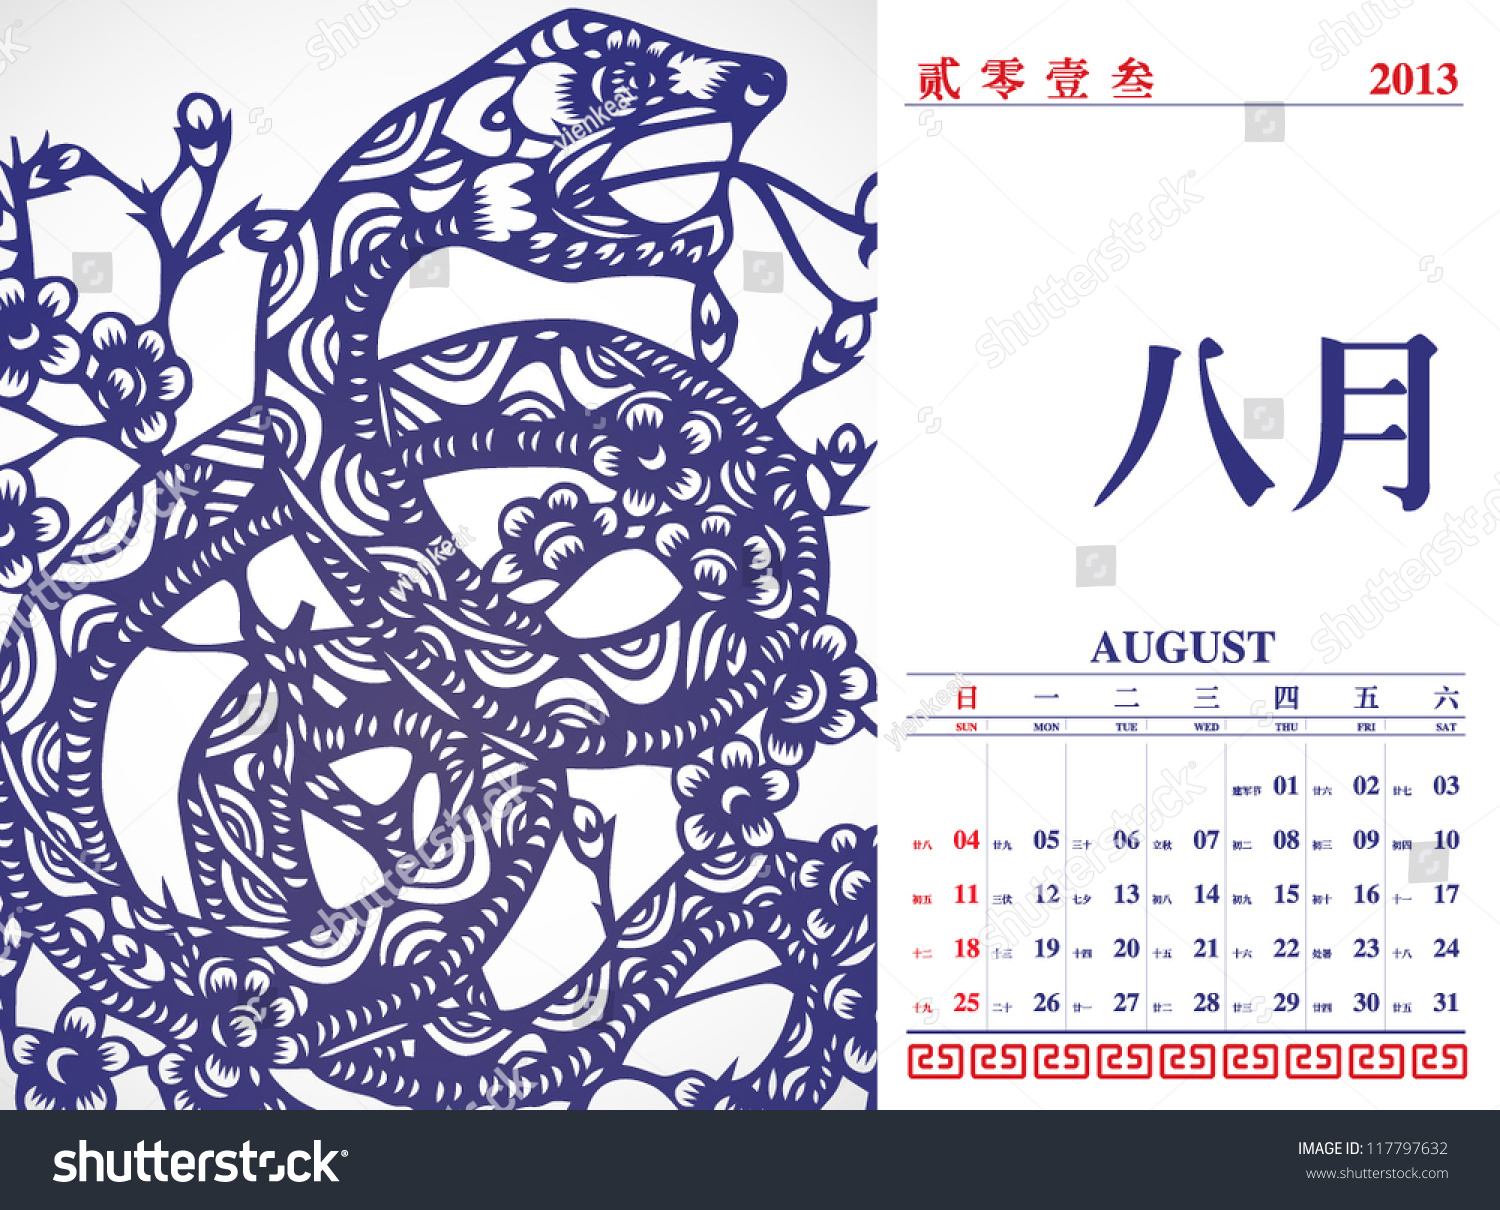 Vector Retro Chinese Calendar Design 2013 With Snake Paper Cutting